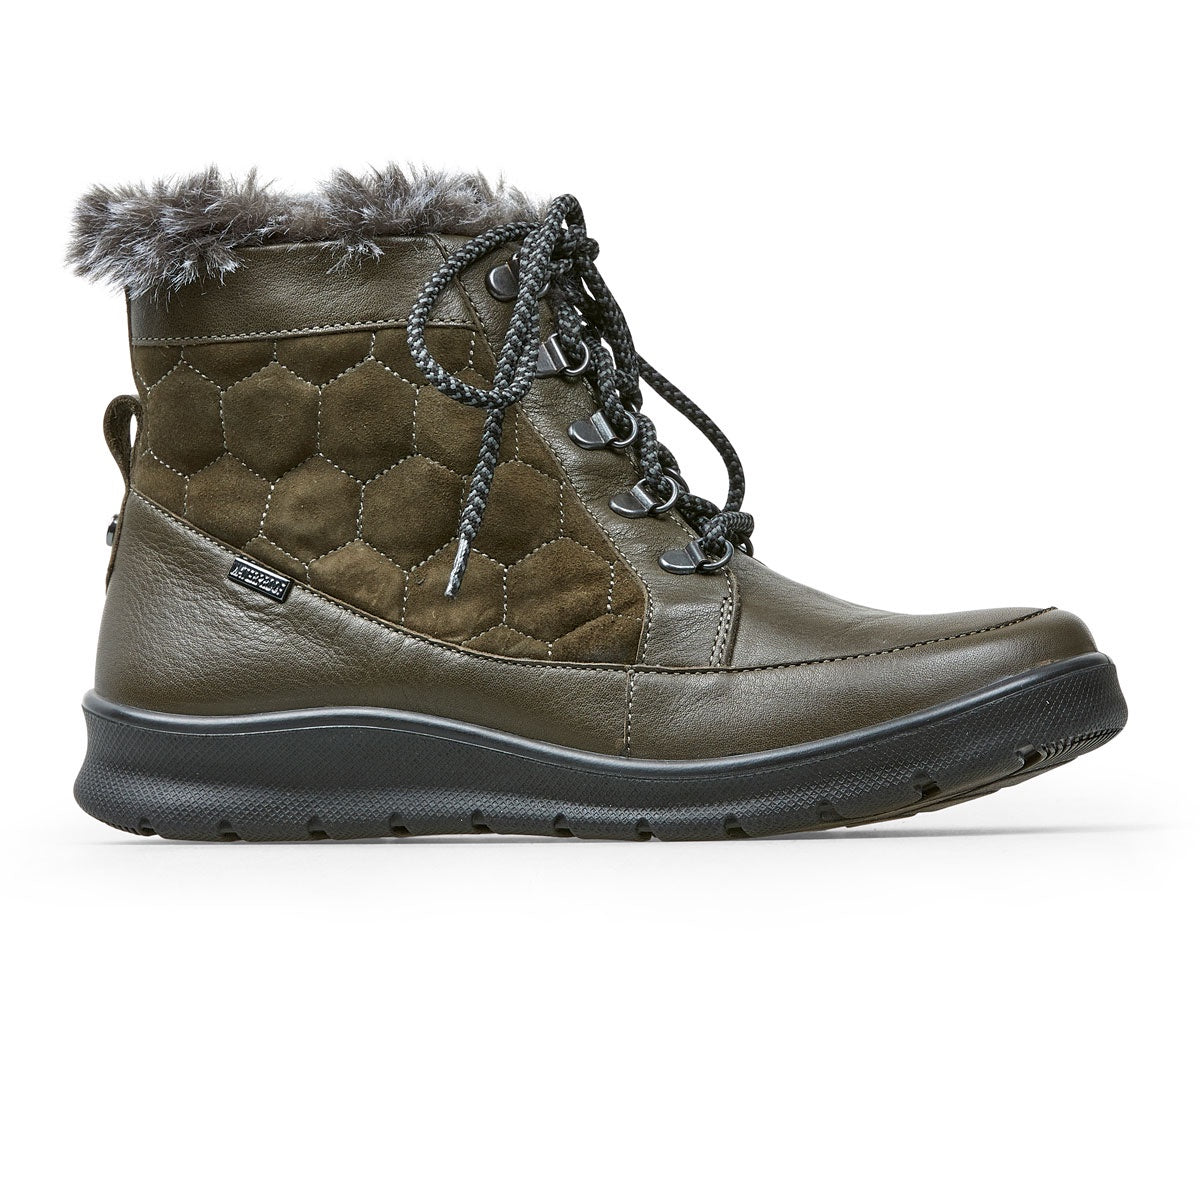 Van Dal Kinder 3194 Ladies 6501 Olive Leather Wider Dual Fit Lace Up Ankle Walking Boots E Fit